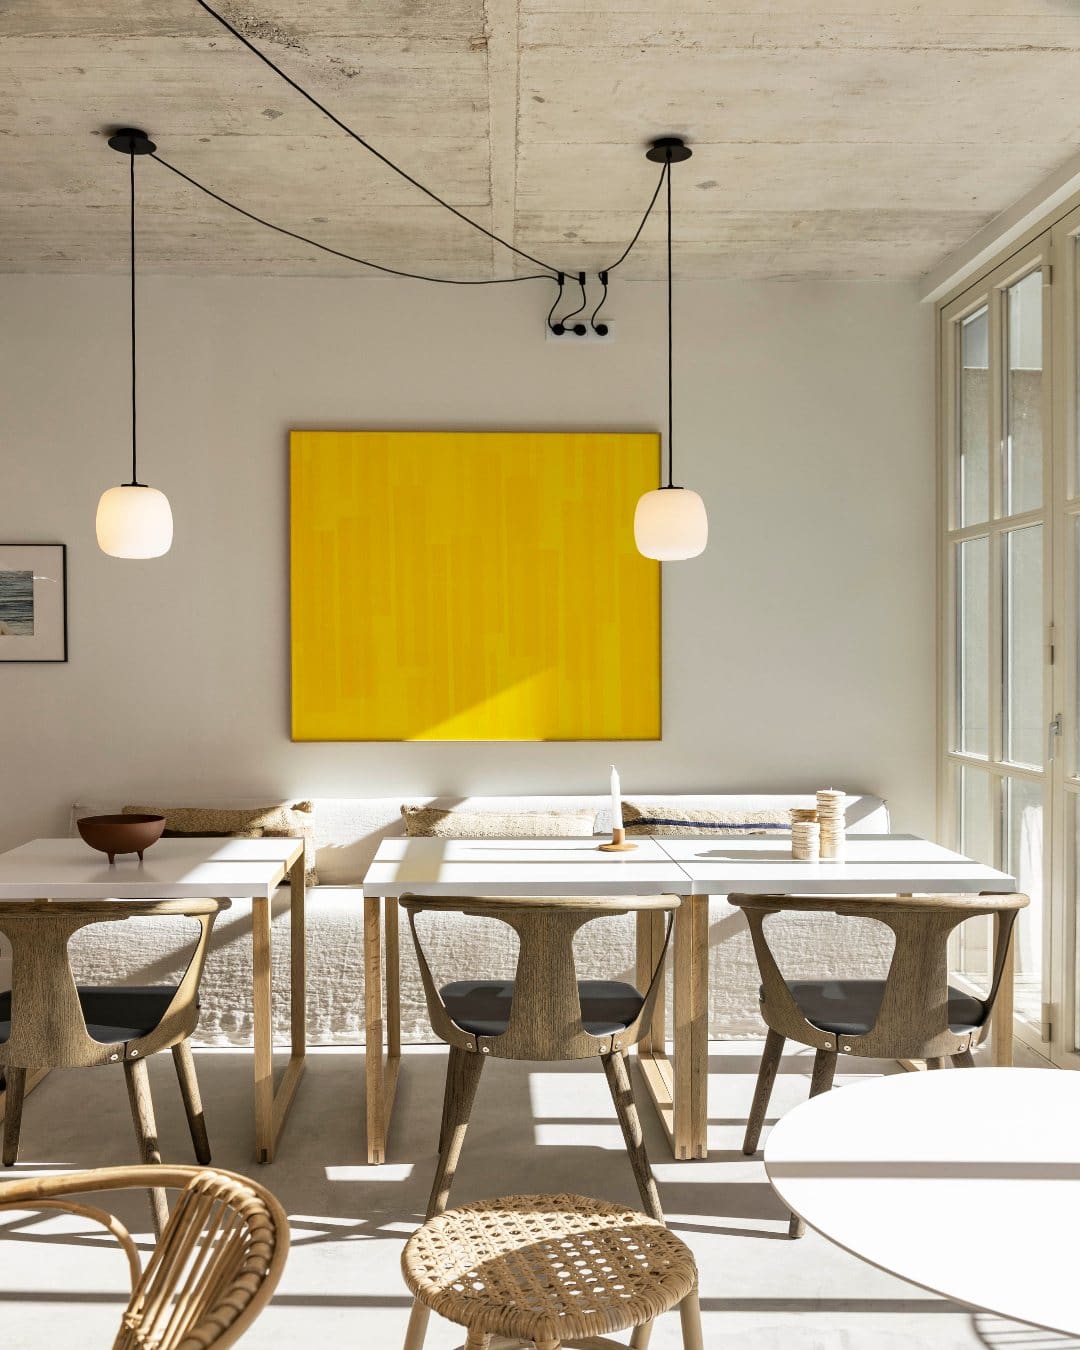 A light-filled kitchen area with vibrant artworks and pendant lights at Pátio do Tijolo